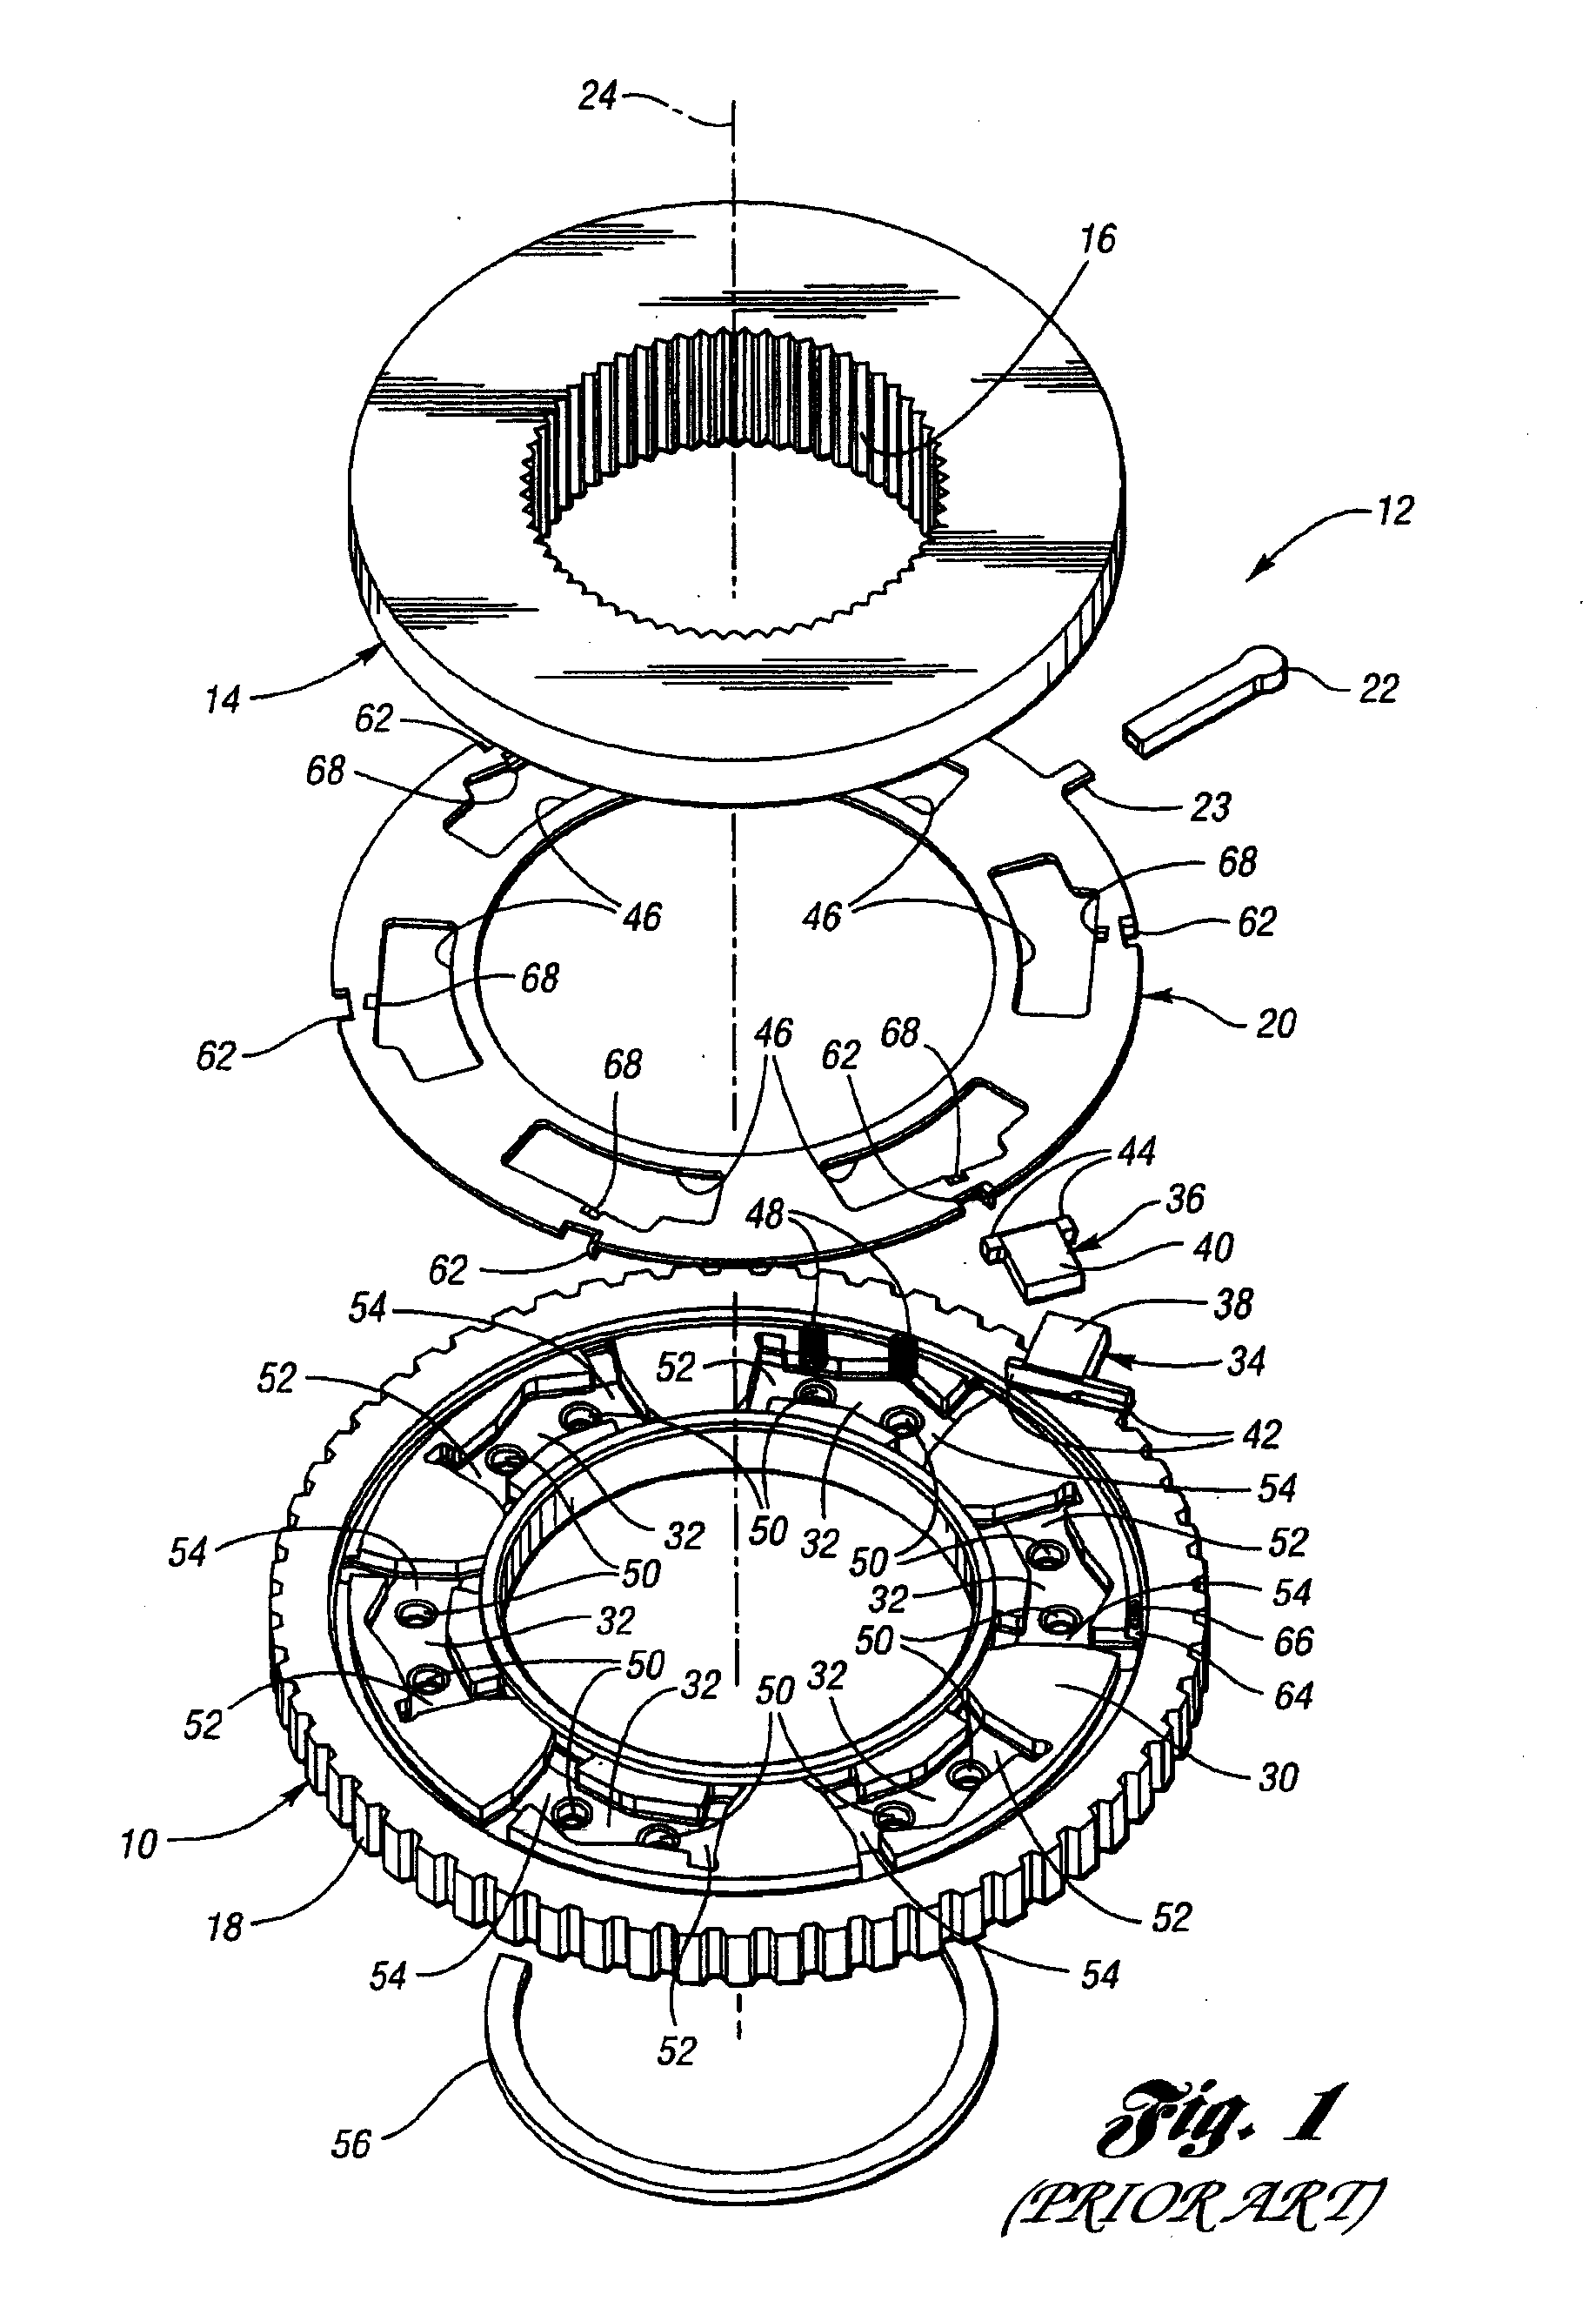 Overrunning coupling and control assembly including apparatus having a latching mechanism